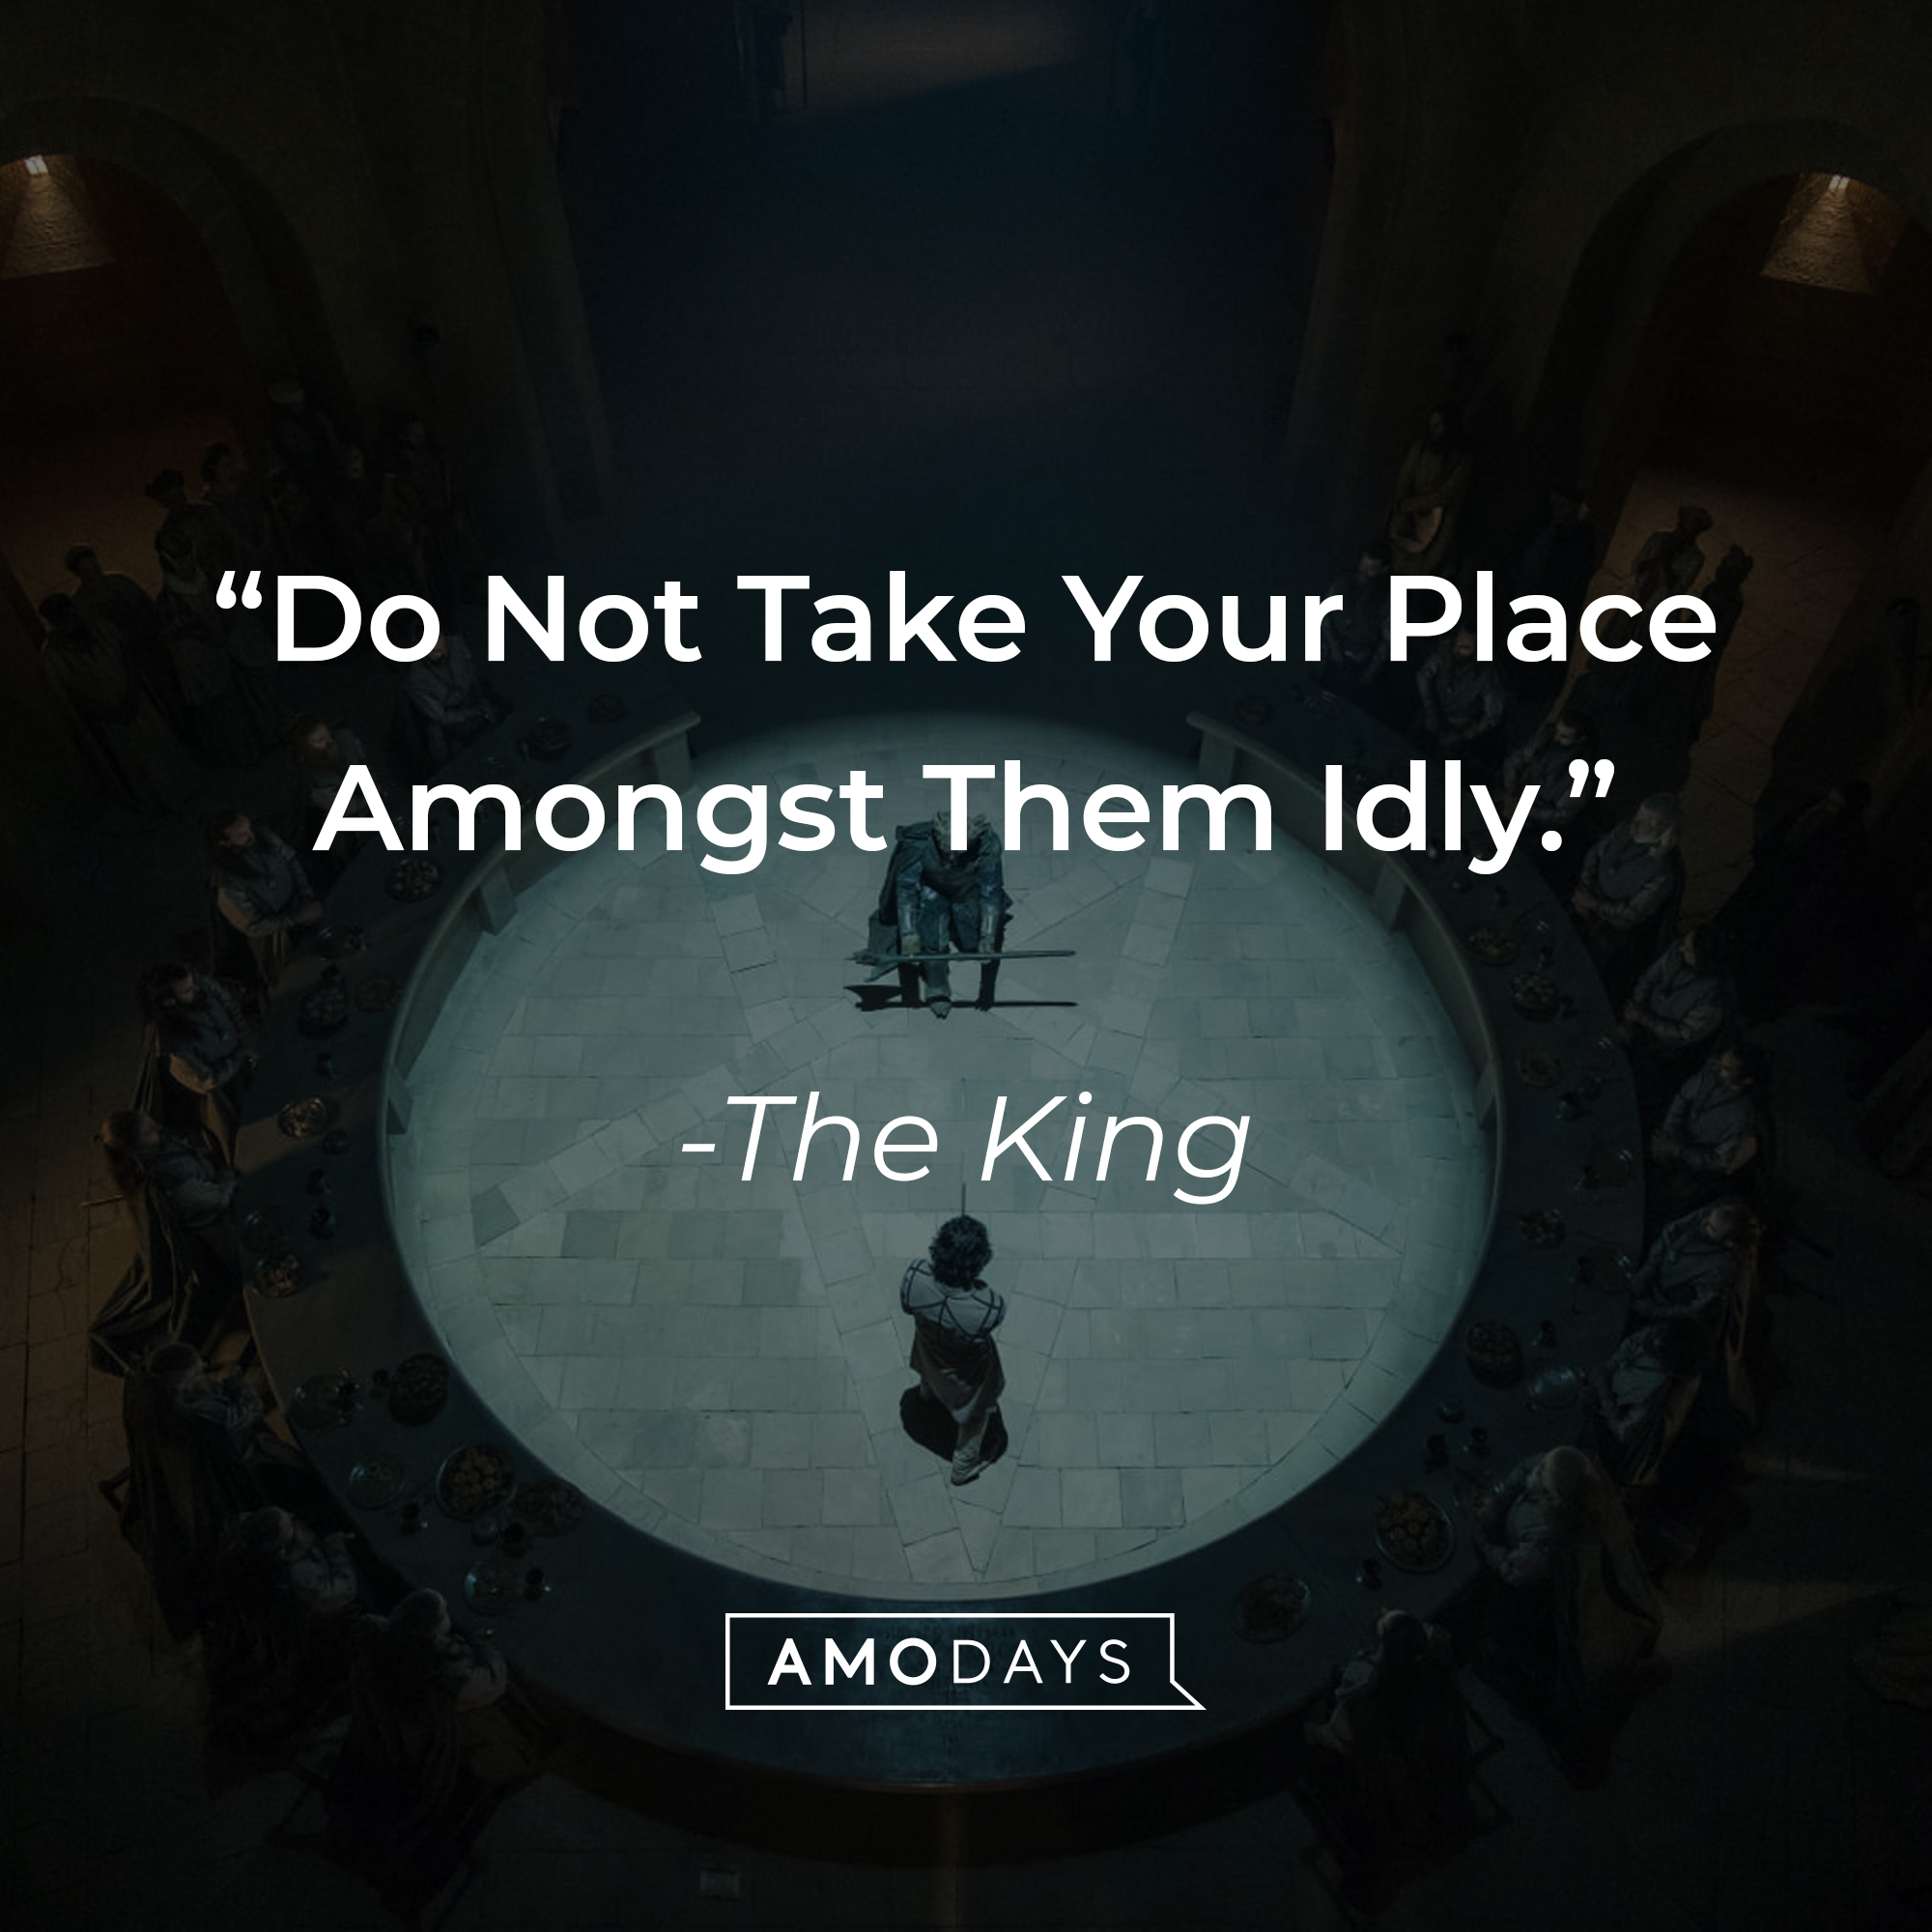 The King's quote: "Do Not Take Your Place Amongst Them Idly." | Source: facebook.com/TheGreenKnight